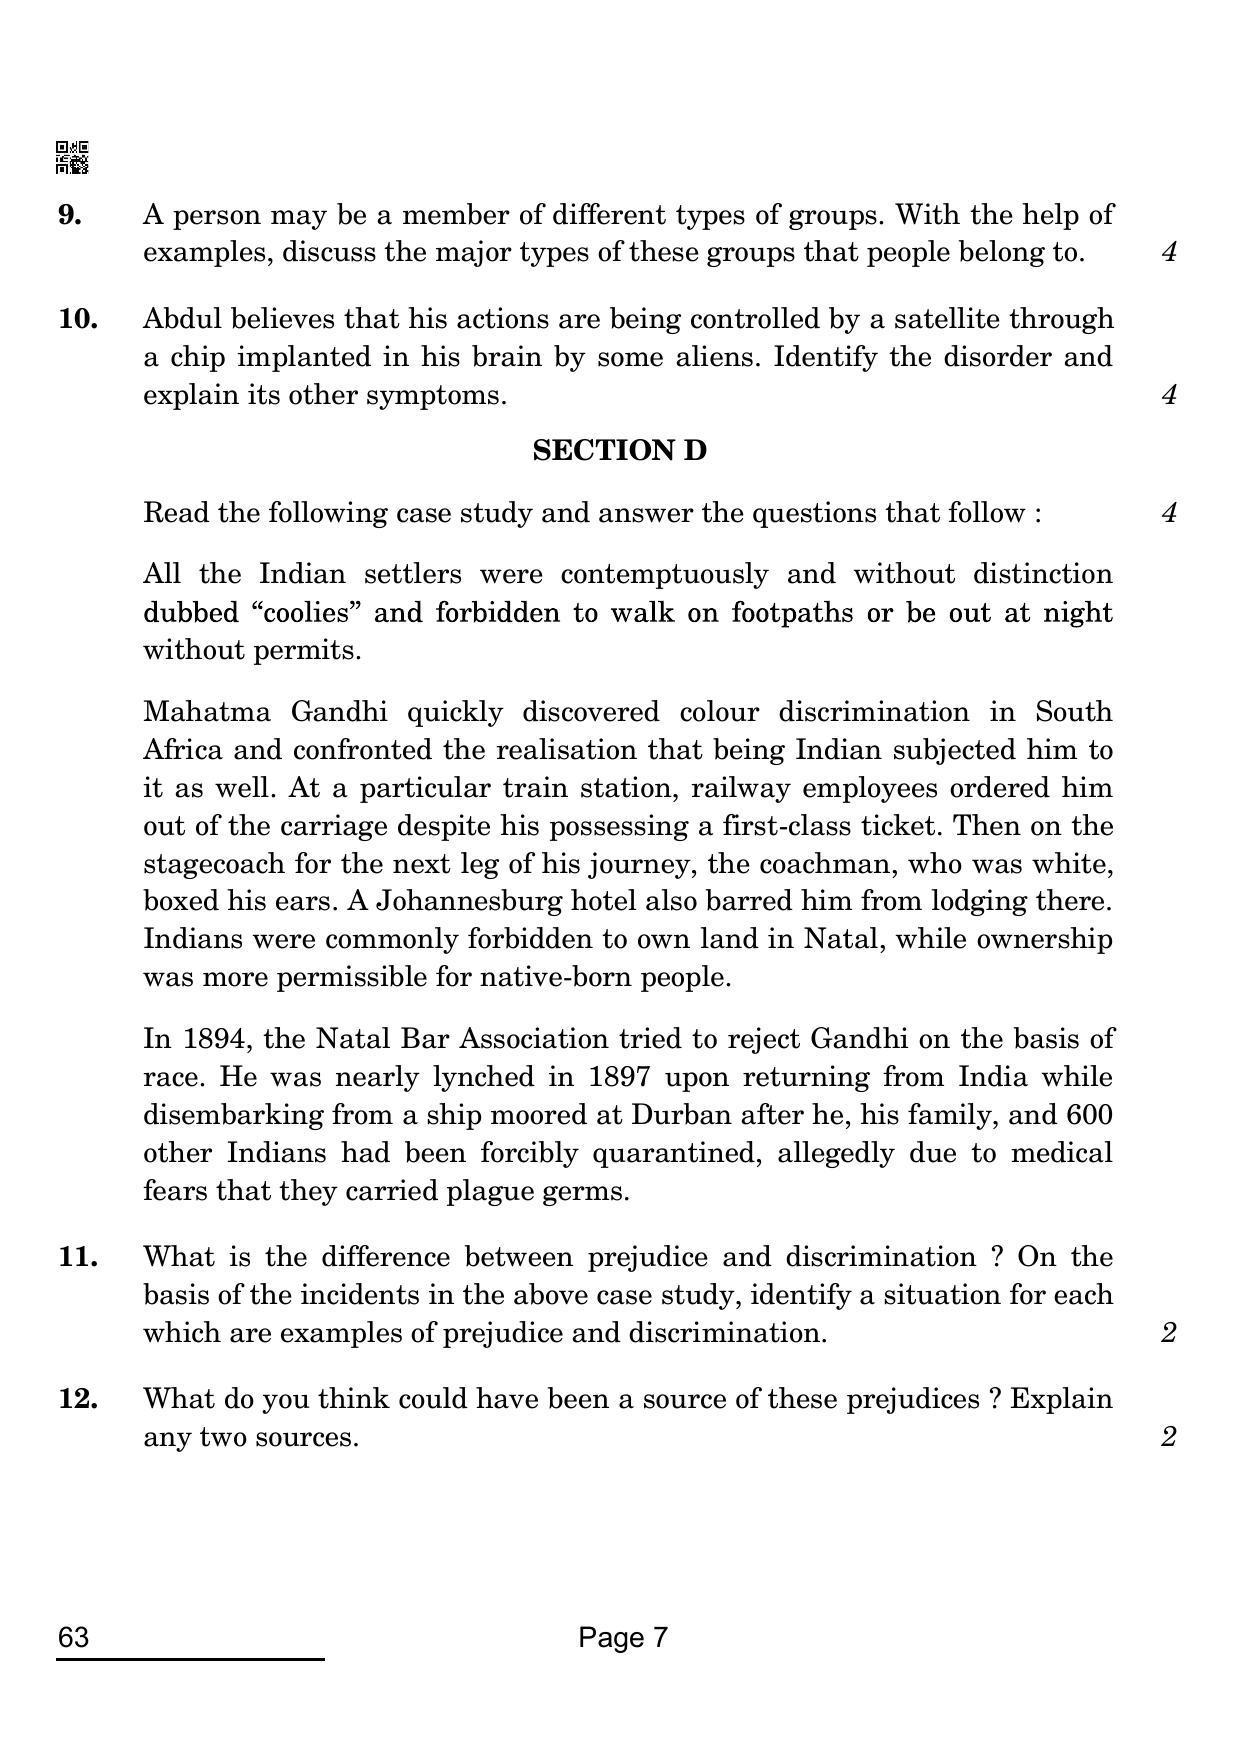 CBSE Class 12 63 Psychology 2022 Compartment Question Paper - Page 7